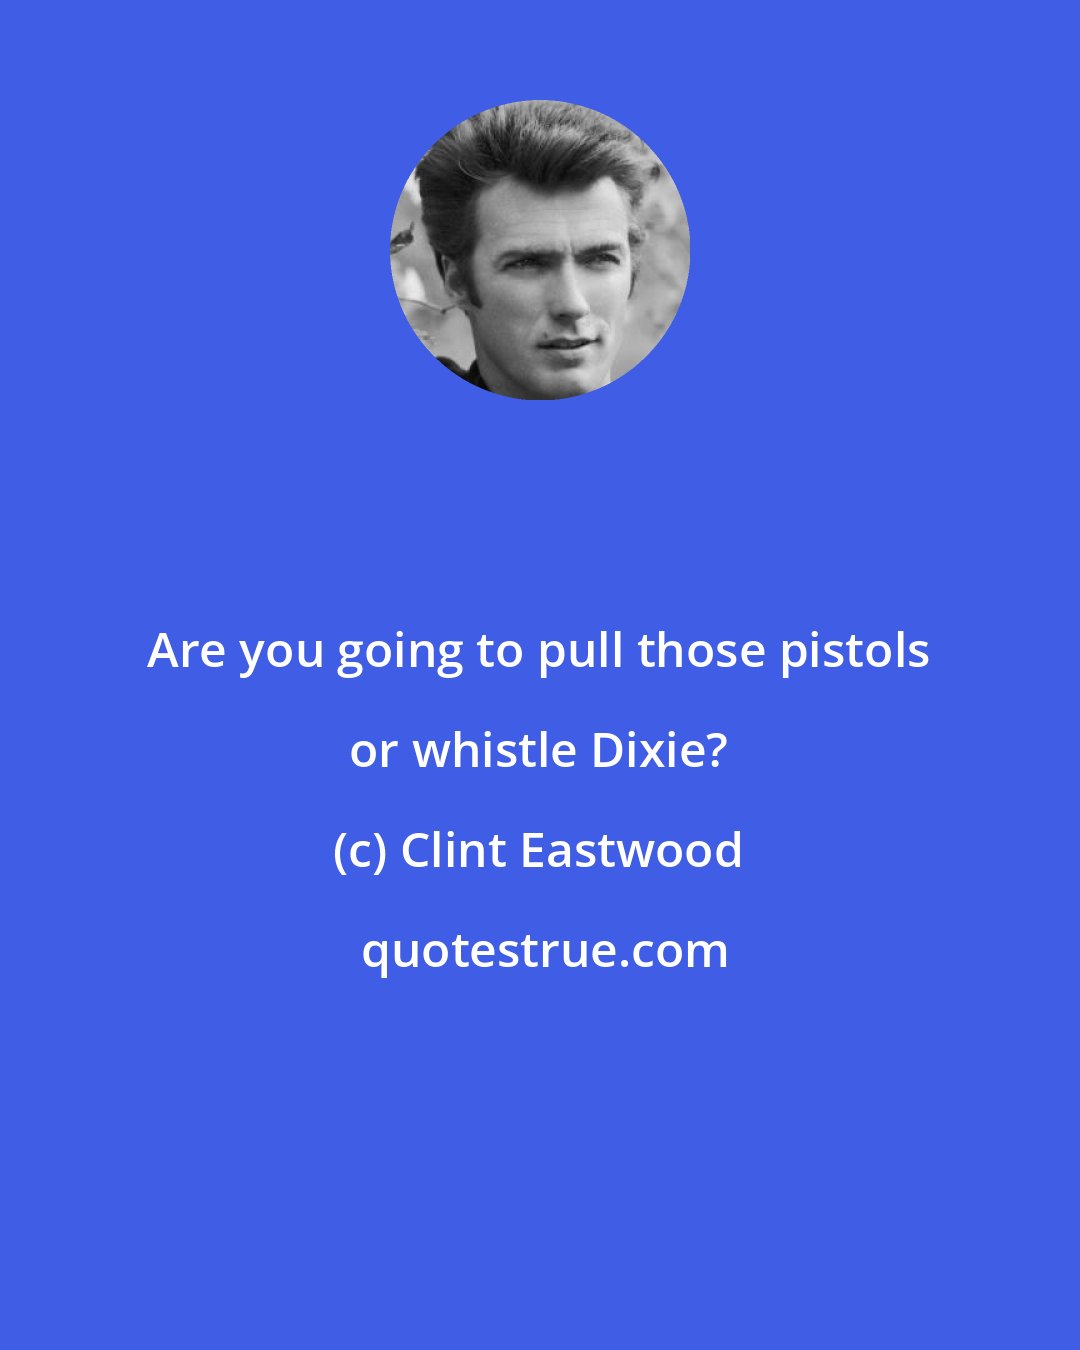 Clint Eastwood: Are you going to pull those pistols or whistle Dixie?